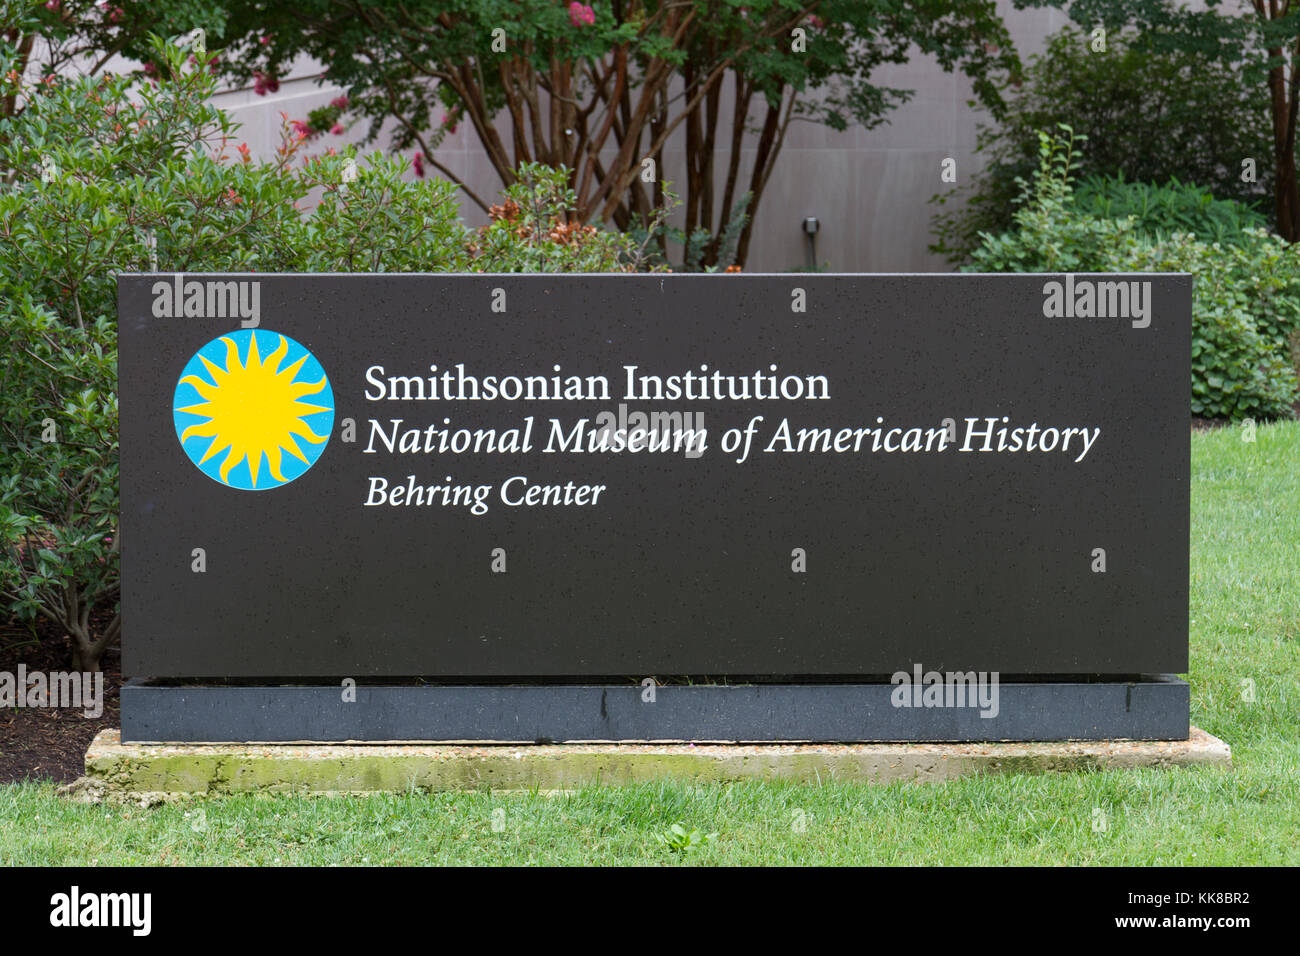 Entrance sign to the Smithsonian Institution, National Museum of American  History, Behring Center in Washington DC, United States Stock Photo - Alamy